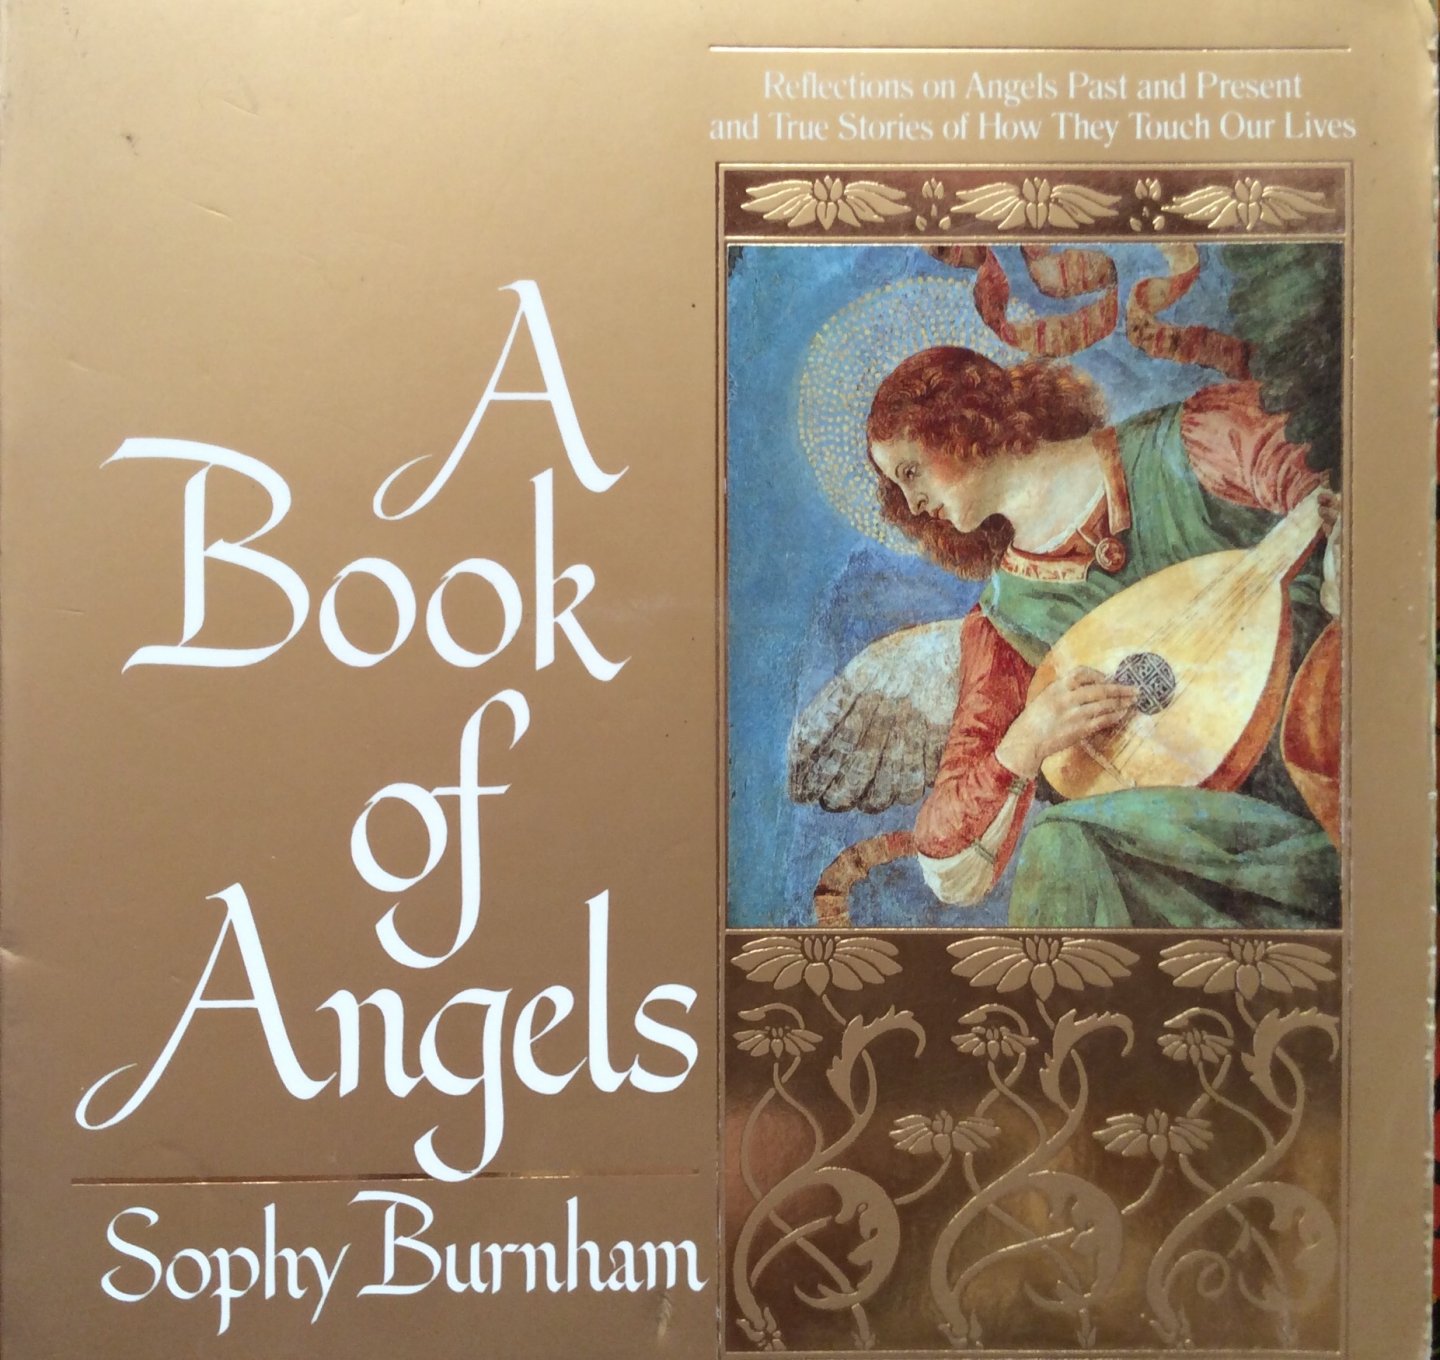 Burnham, Sophy - A Book of Angels; reflections on angels past and present and true stories of how they touch our lives